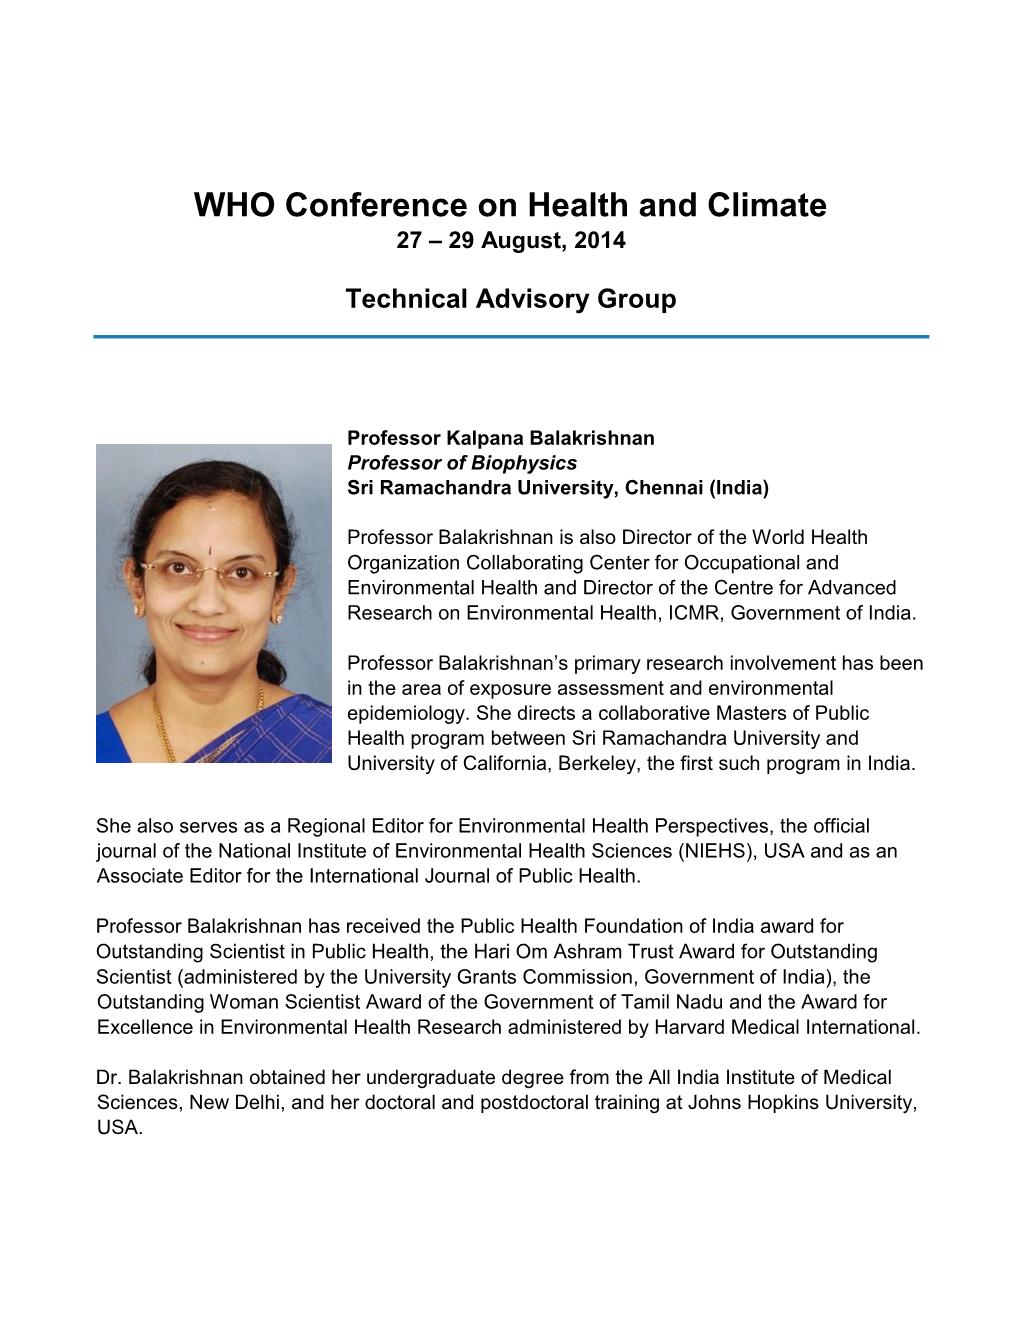 WHO Conference on Health and Climate 27 – 29 August, 2014